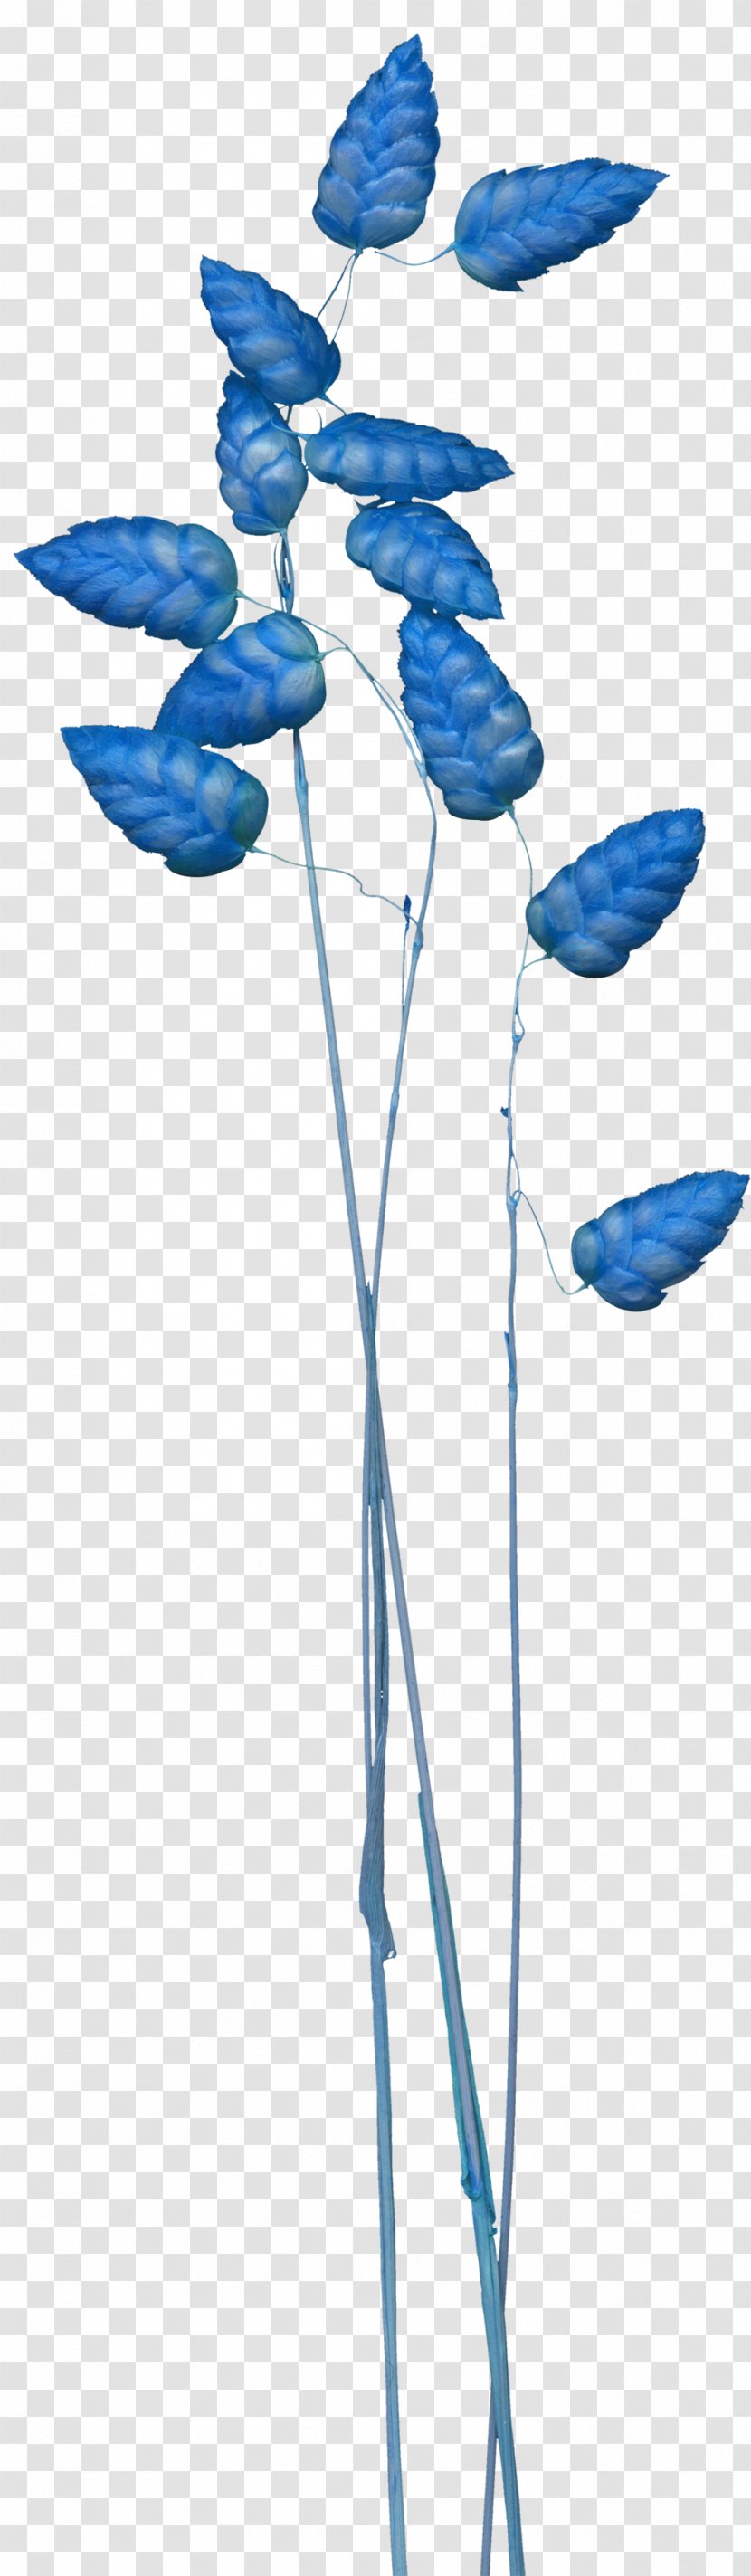 Blue Balloon Clip Art - Branch - Leaves Small Transparent PNG